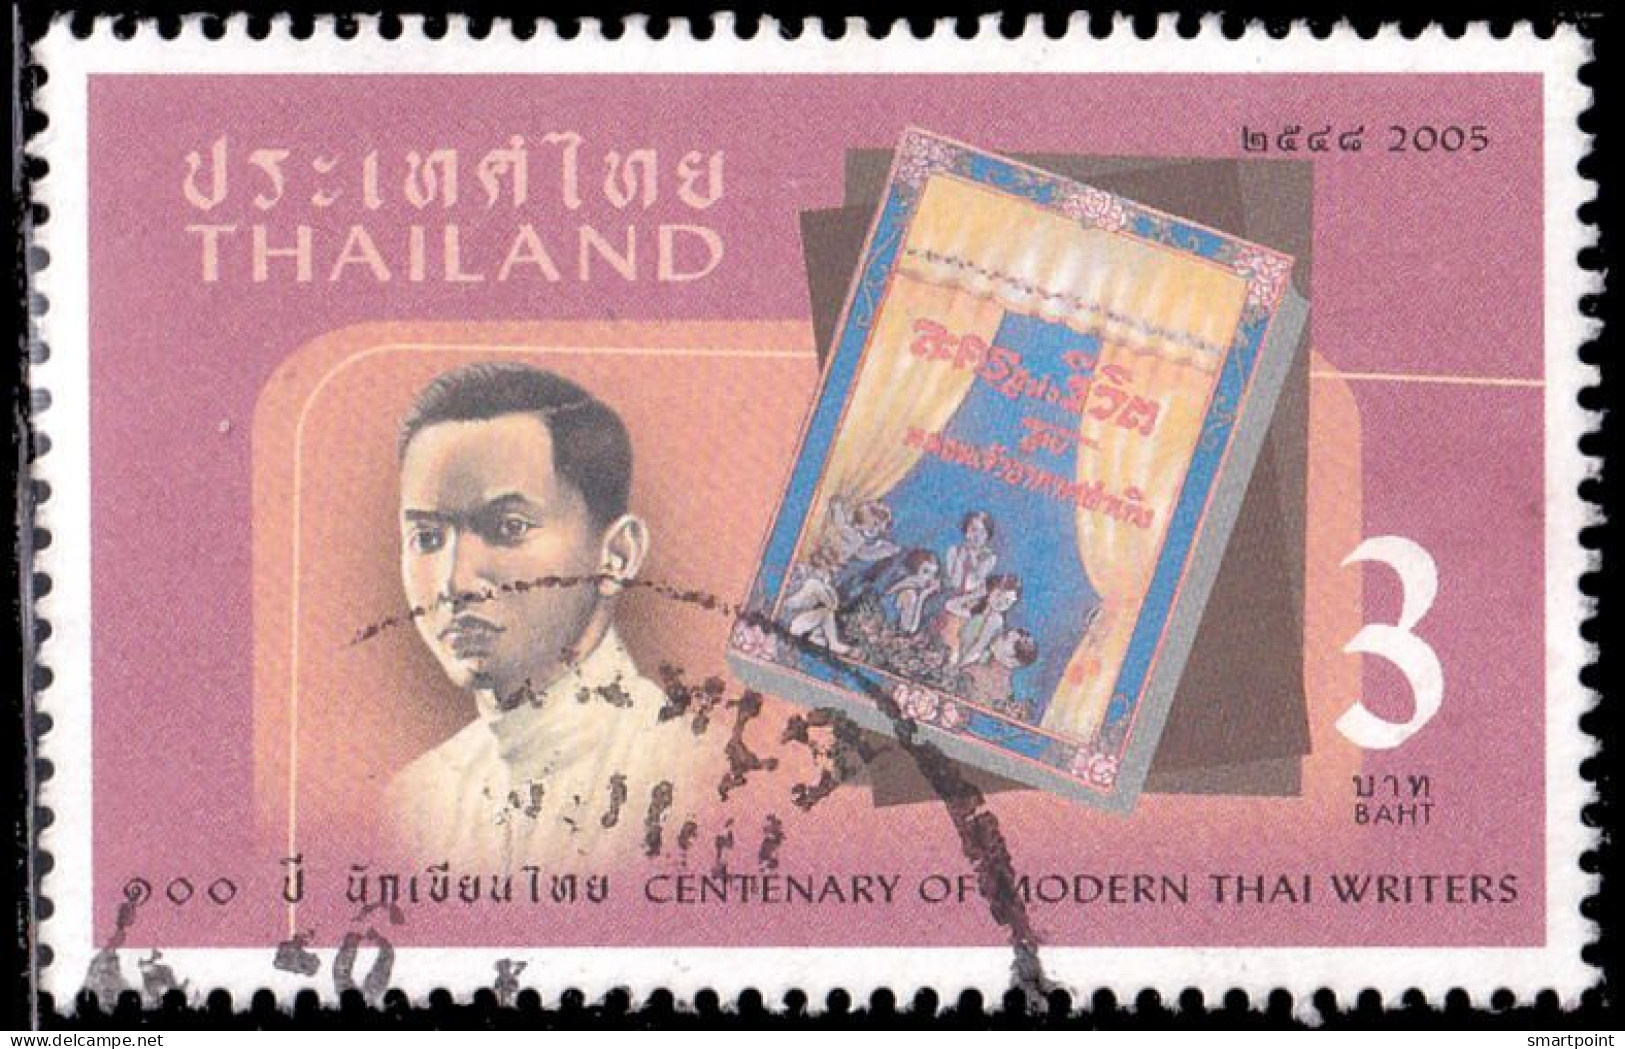 Thailand Stamp 2005 Centenary Of Modern Thai Writers 3 Baht - Used - Thailand